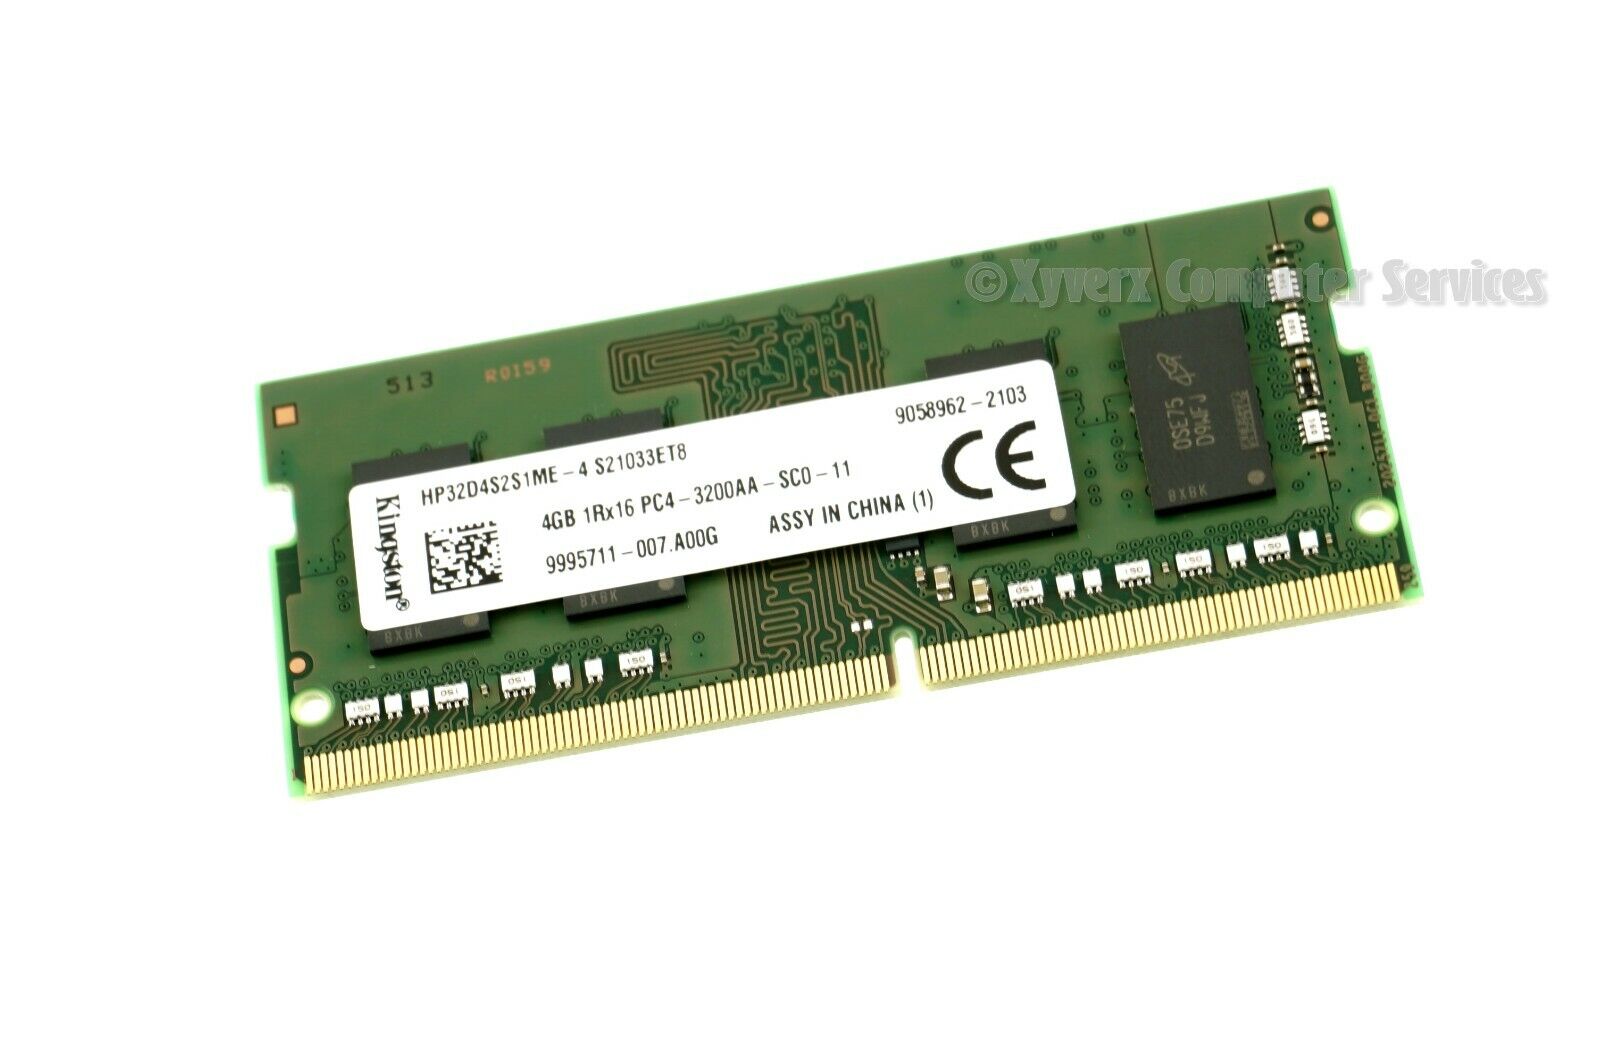 HP32D4S2S1ME-4 OEM KINSTON LAPTOP 4GB Recommended 1RX16 Nippon regular agency PC4-3200AA-SC MEMORY